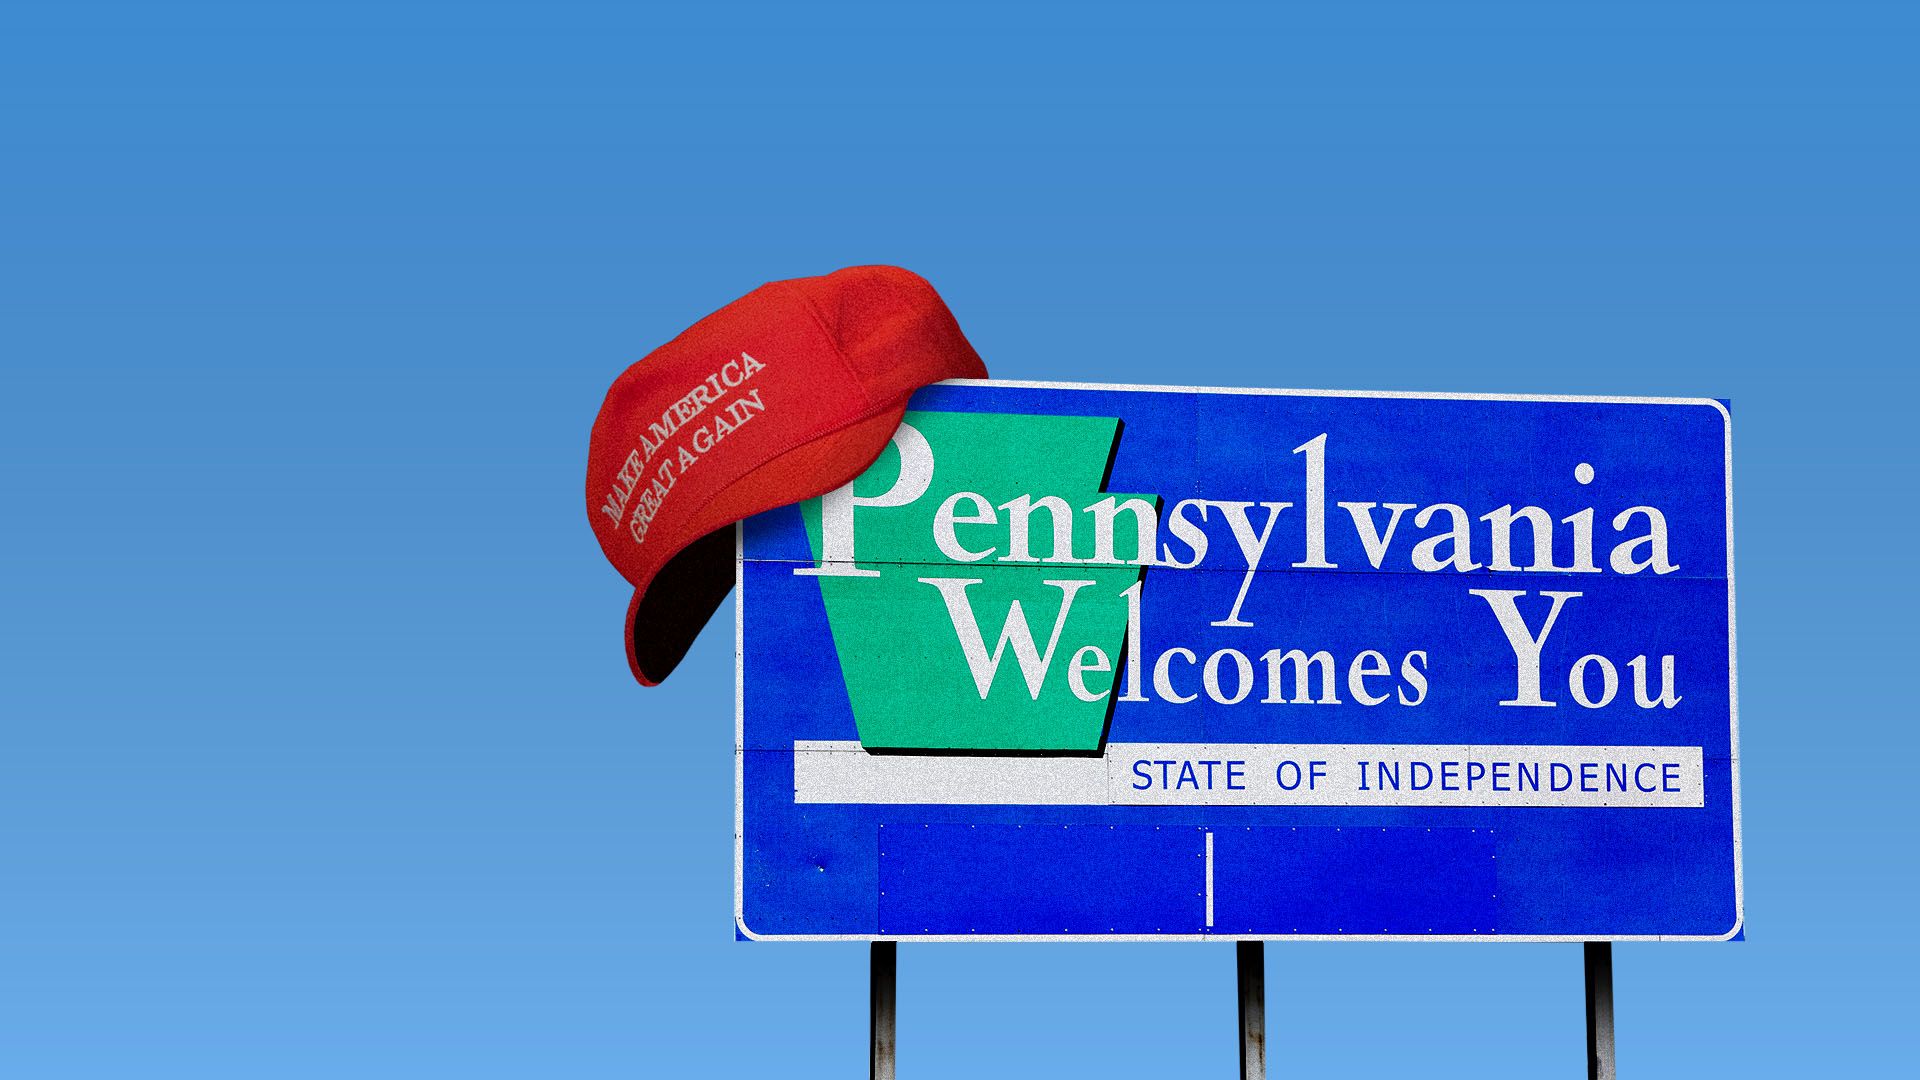 Illustration of a "Pennsylvania welcomes you" road sign wearing a MAGA hat